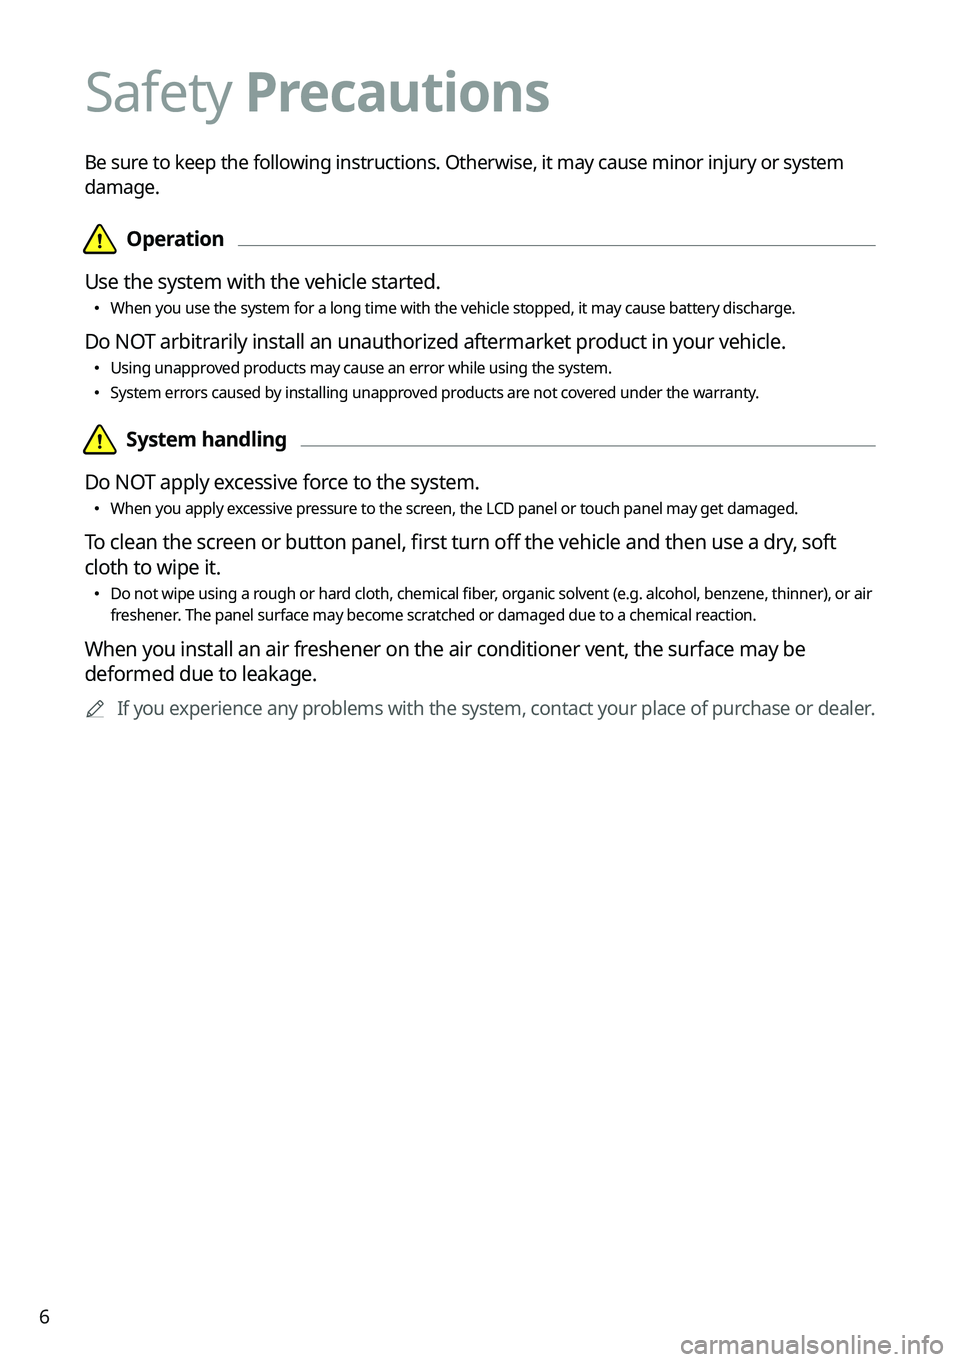 KIA SORENTO 2022  Navigation System Quick Reference Guide 6
Safety Precautions
Be sure to keep the following instructions. Otherwise, it may cause minor injury or system 
damage.
  \334\334Operation
Use the system with the vehicle started.
 \225 When you use